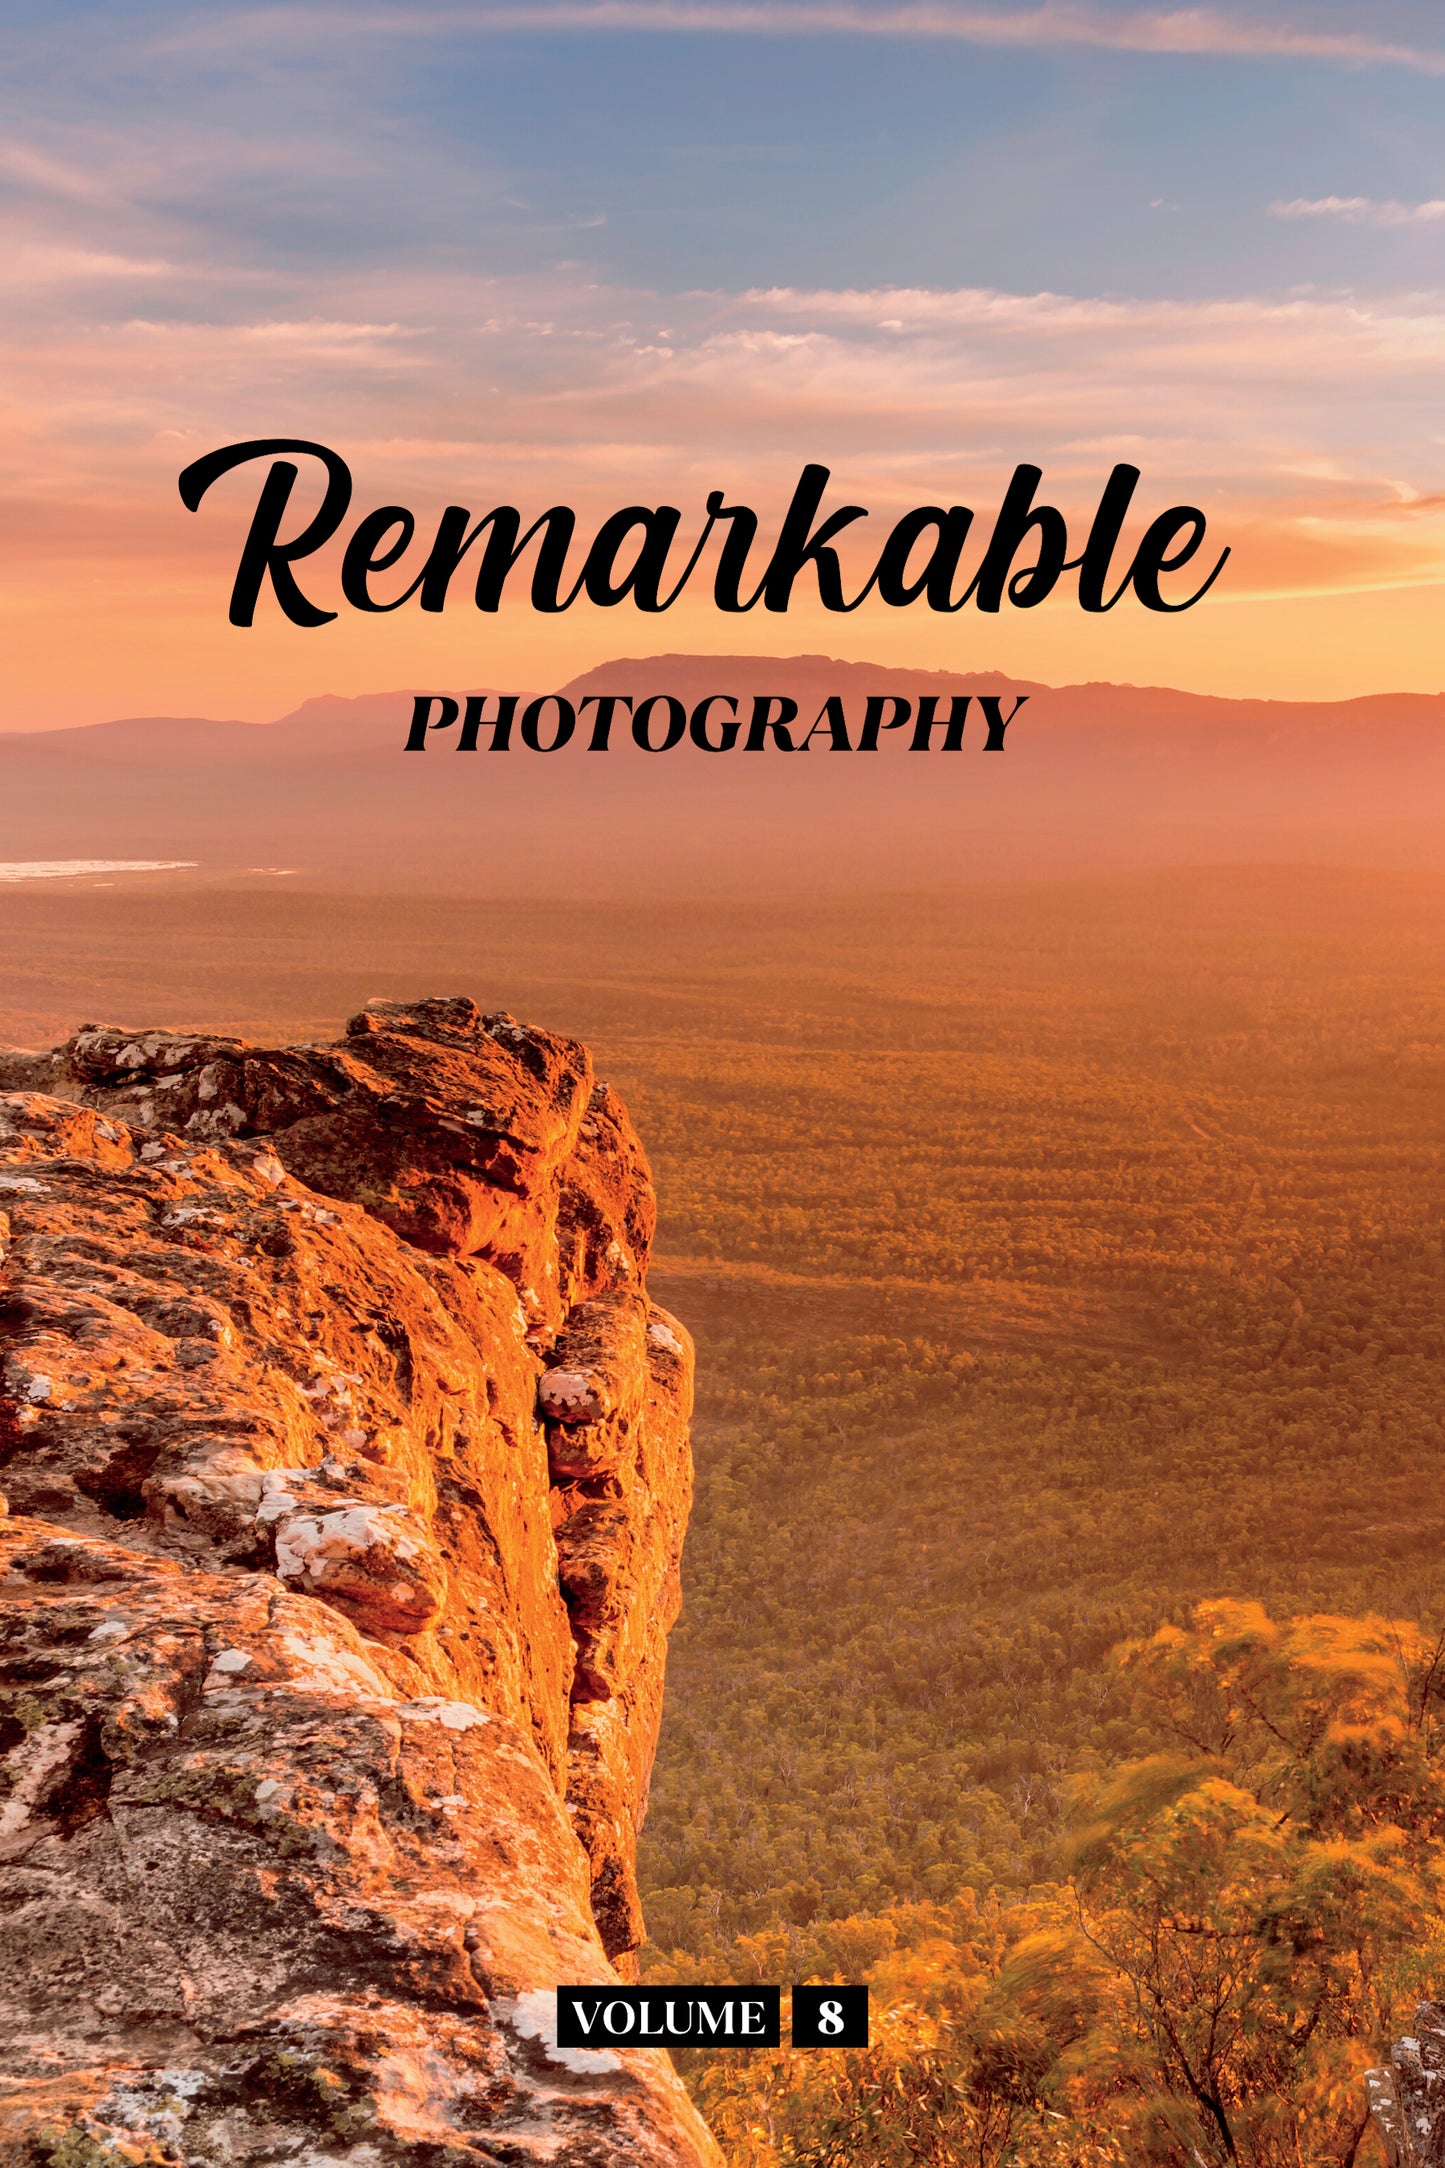 Remarkable Photography Volume 8 (Physical Book)